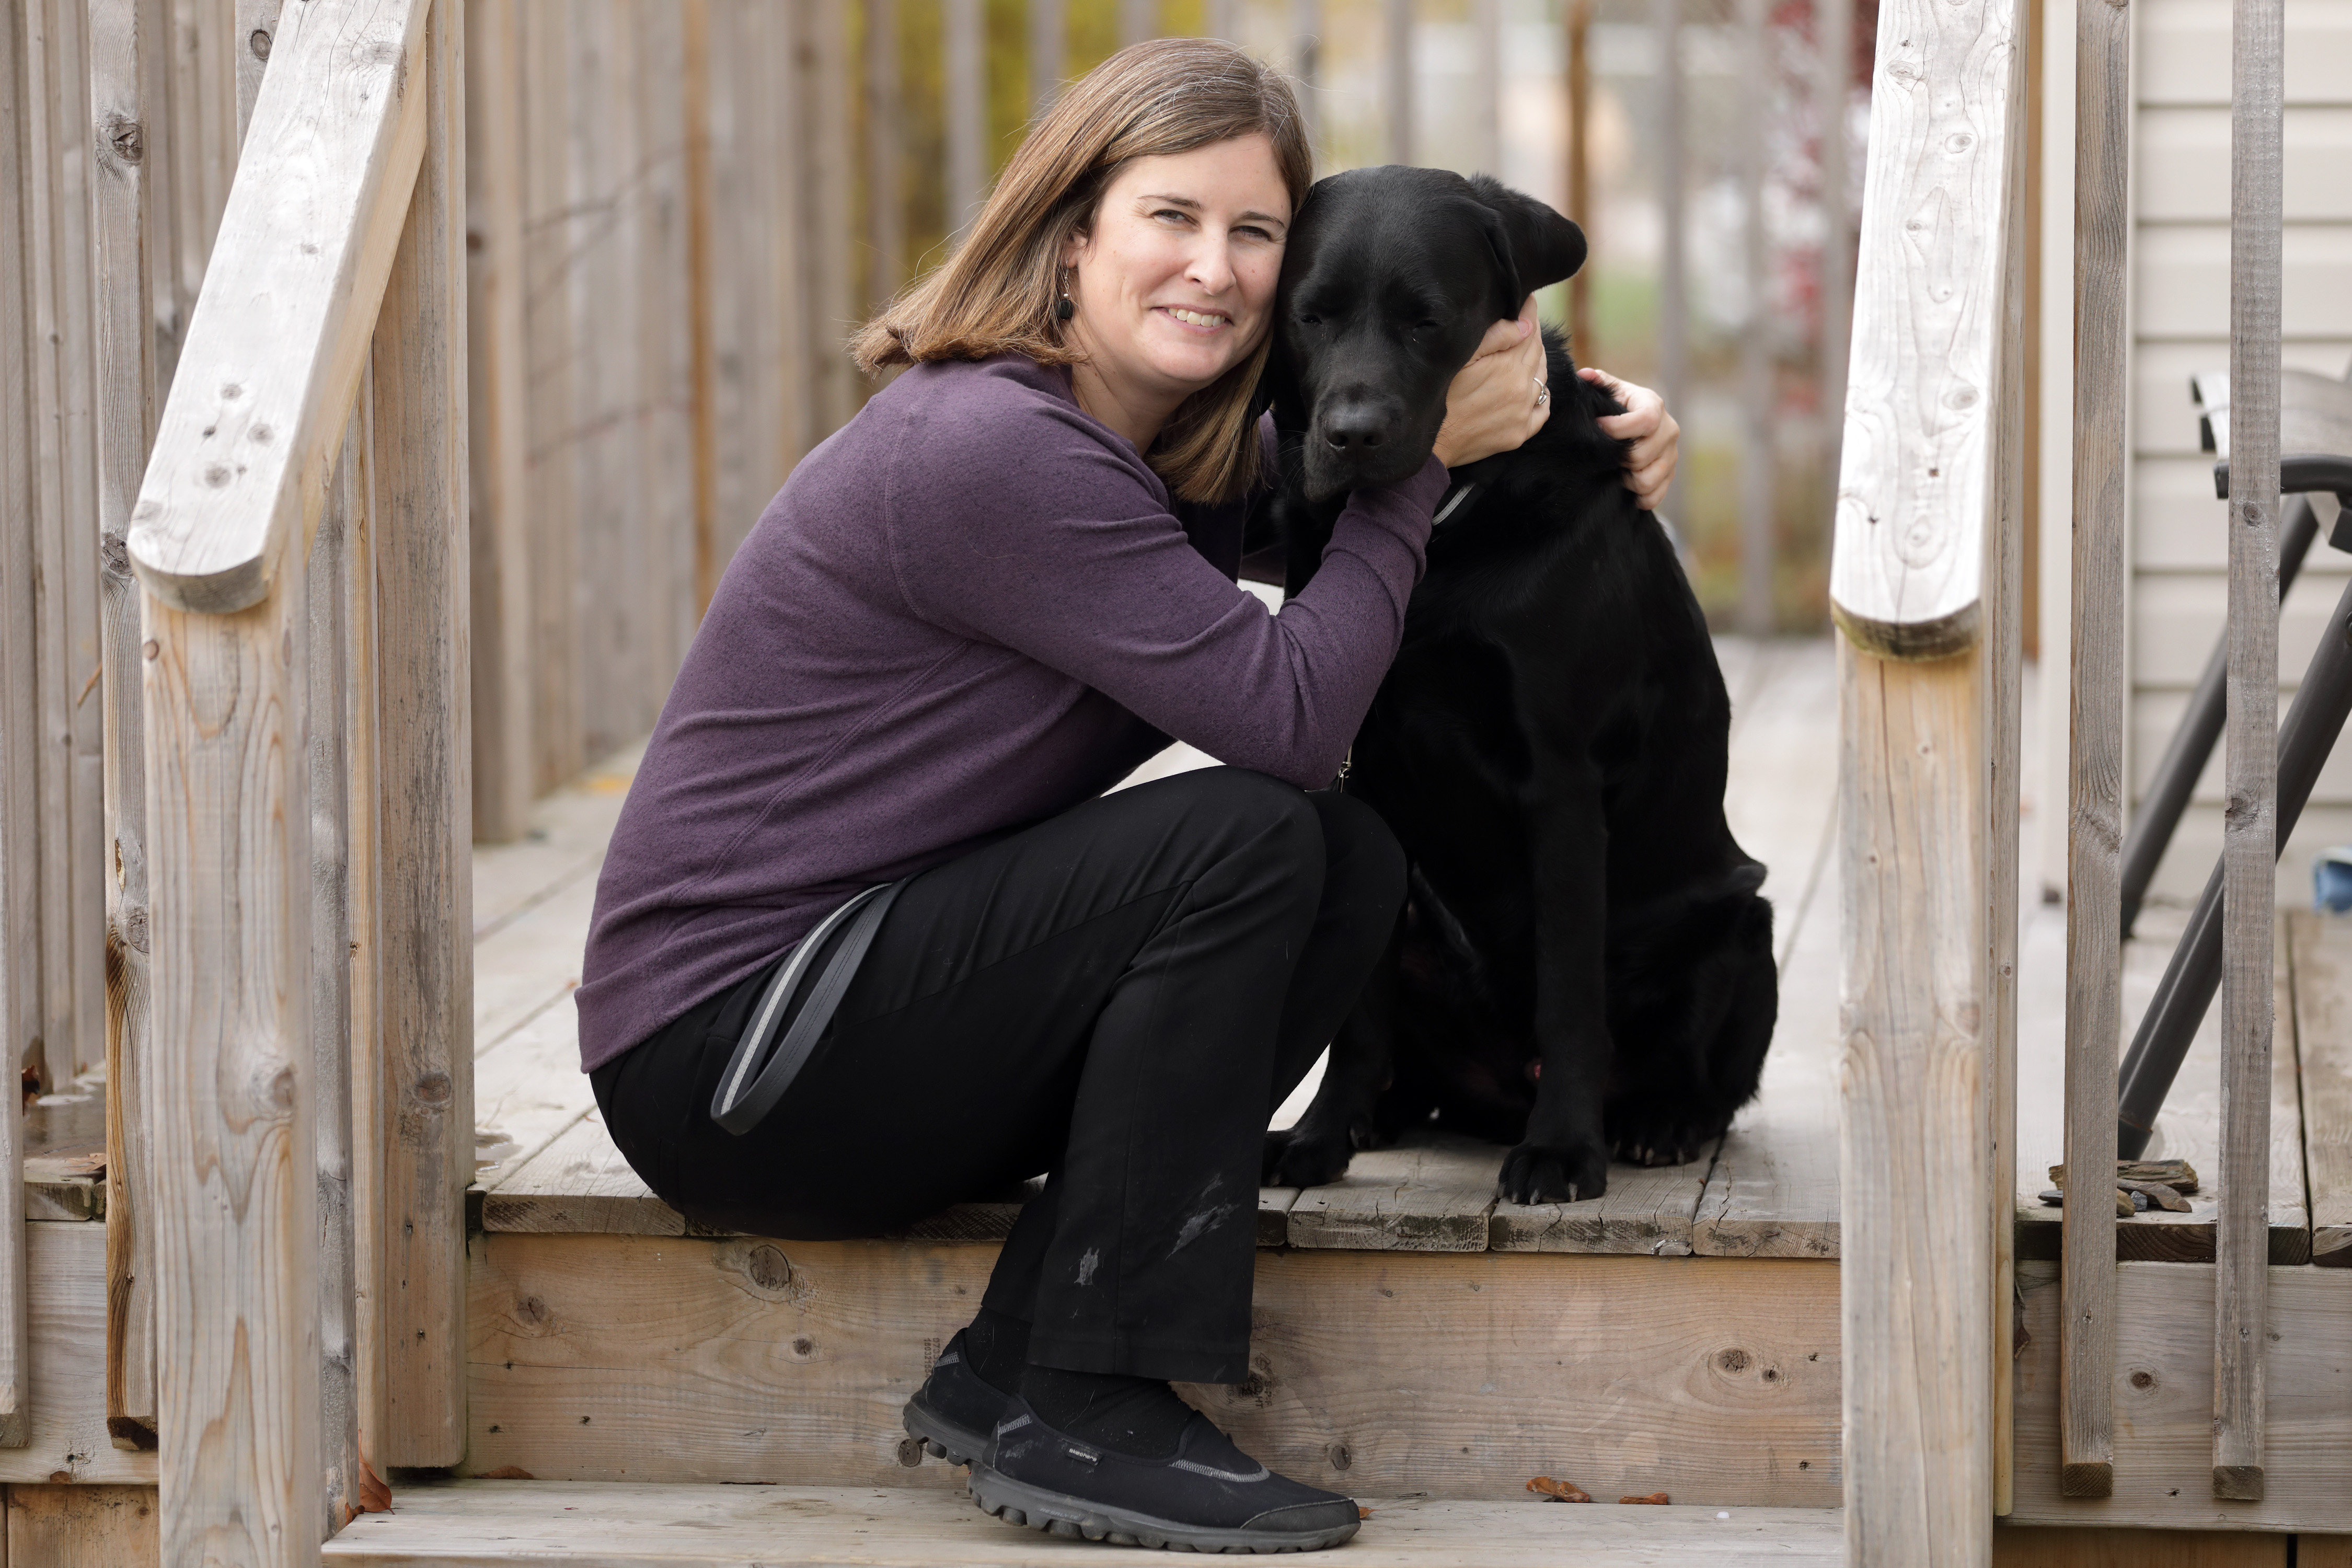 Photo of Shelley sitting on a wooden porch, smiling while giving Rookie a big hug. 